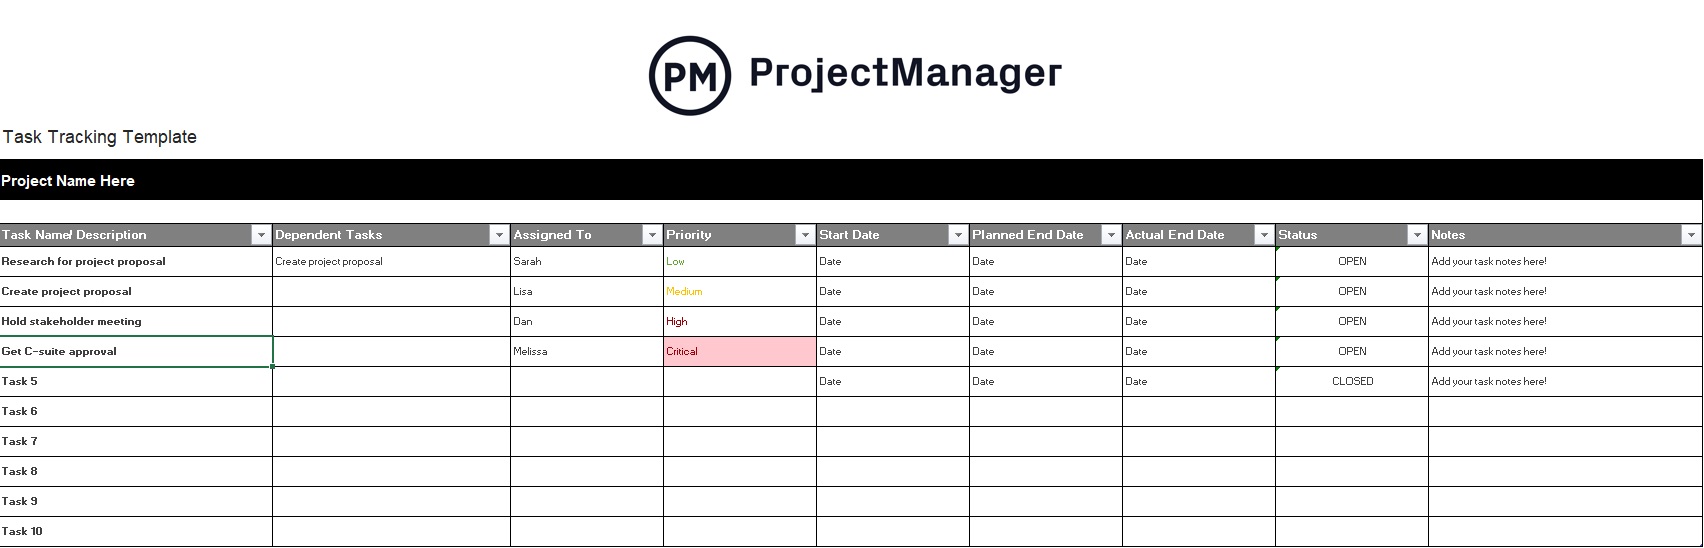 ProjectManager's task tracking template, an excel report template